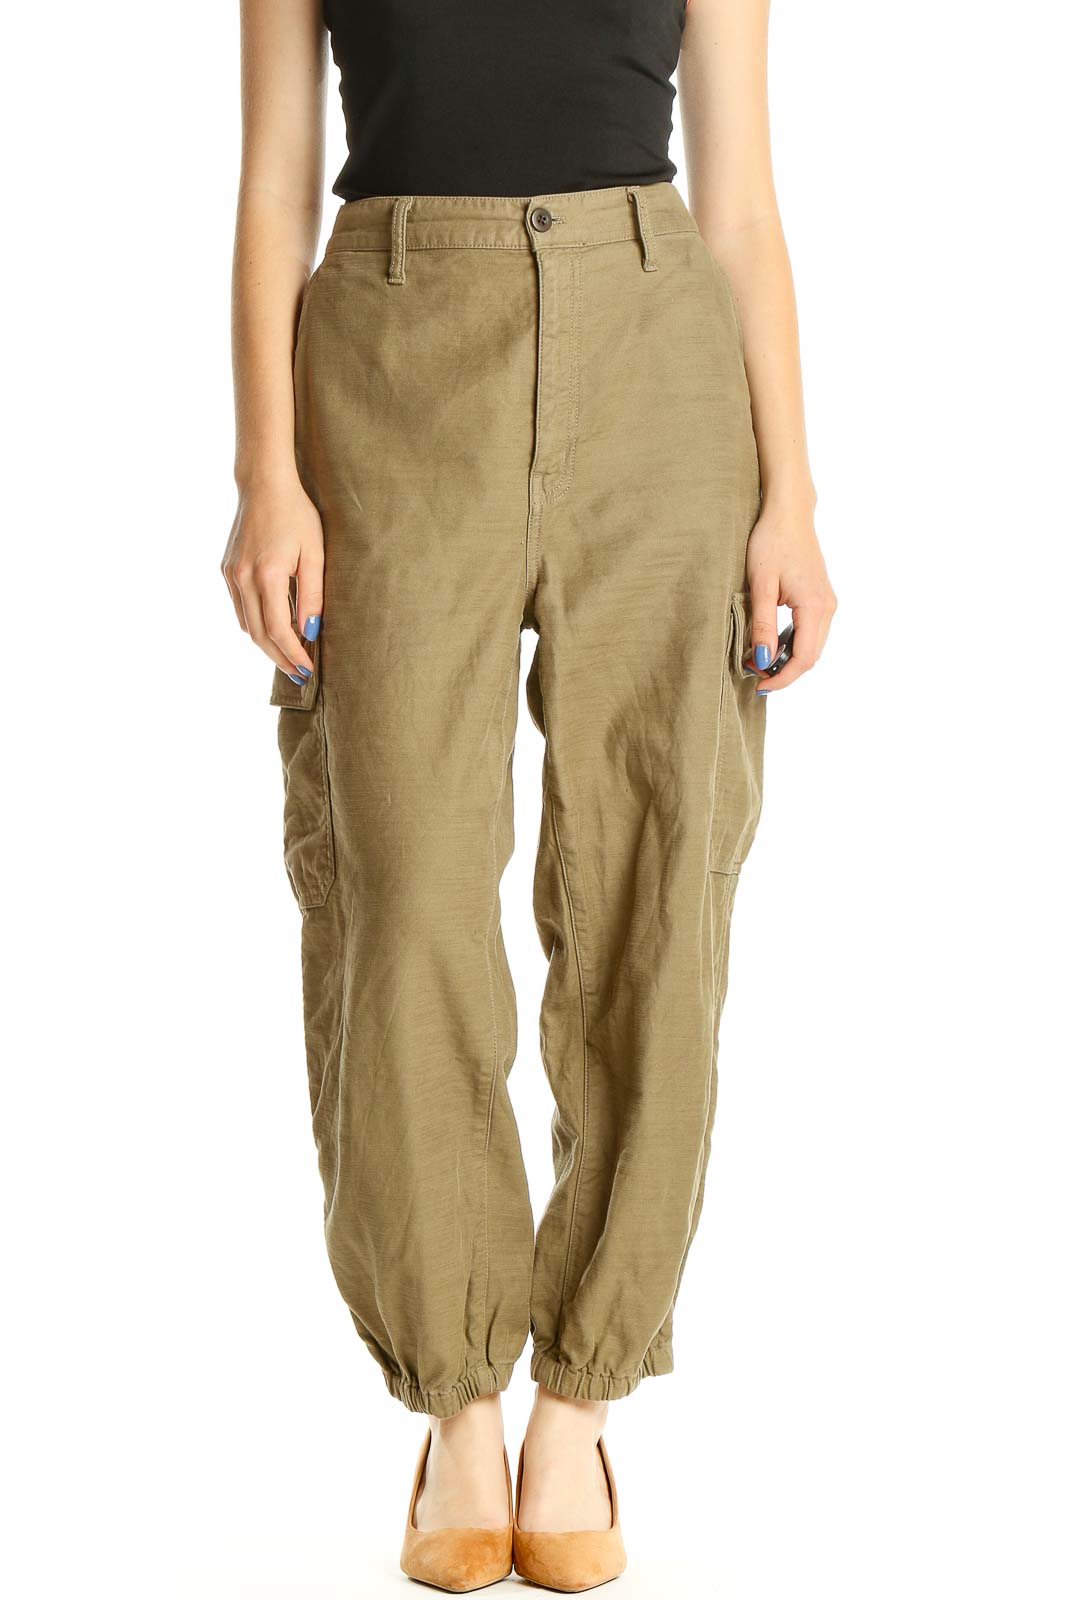 Green Textured All Day Wear Cargos Pants Front